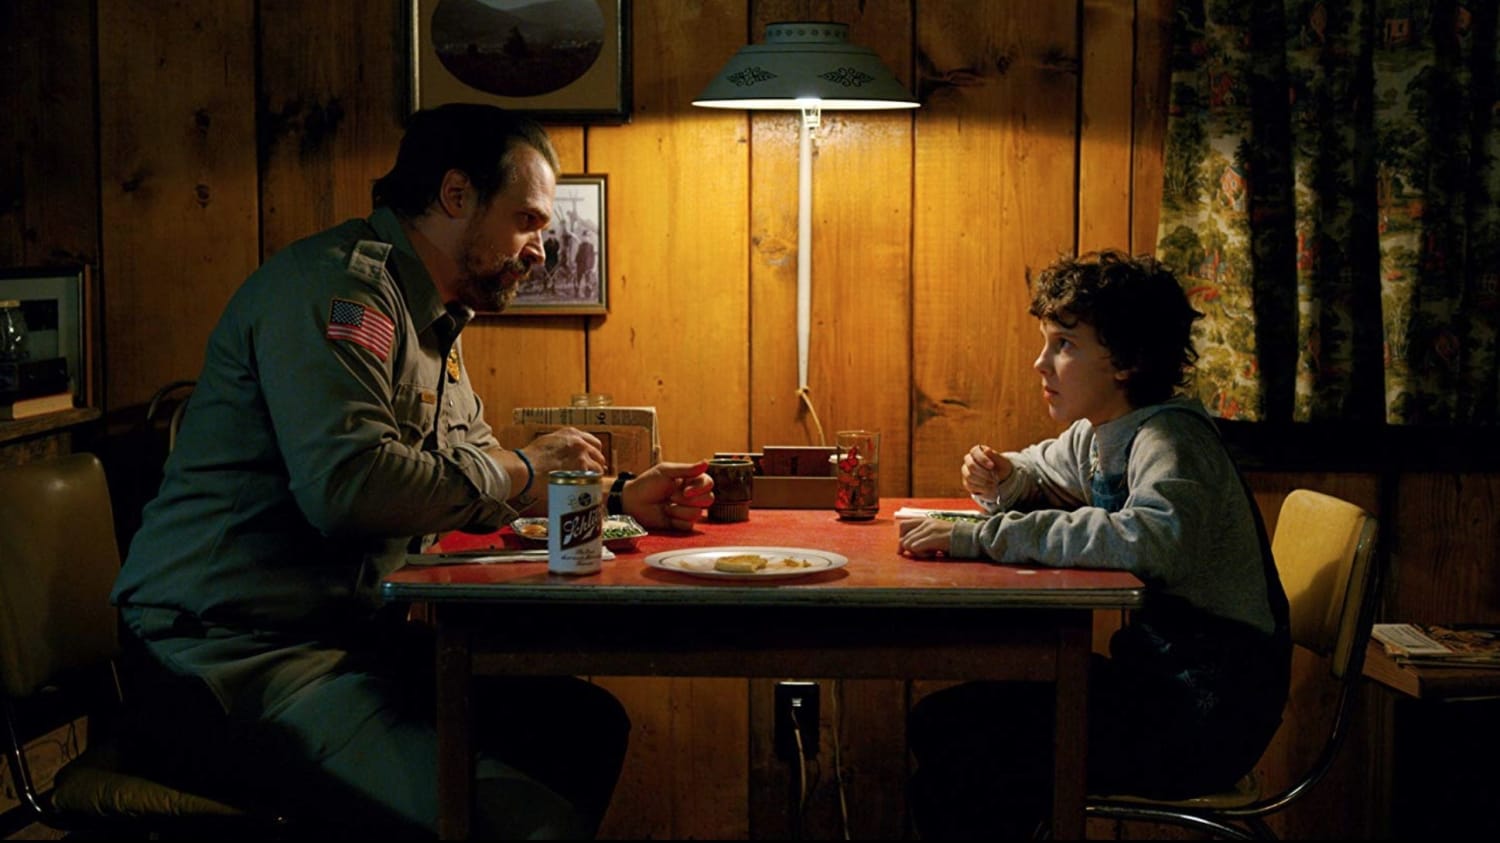 Chief Hopper's Cabin From Stranger Things Has Been Turned Into an Escape Room